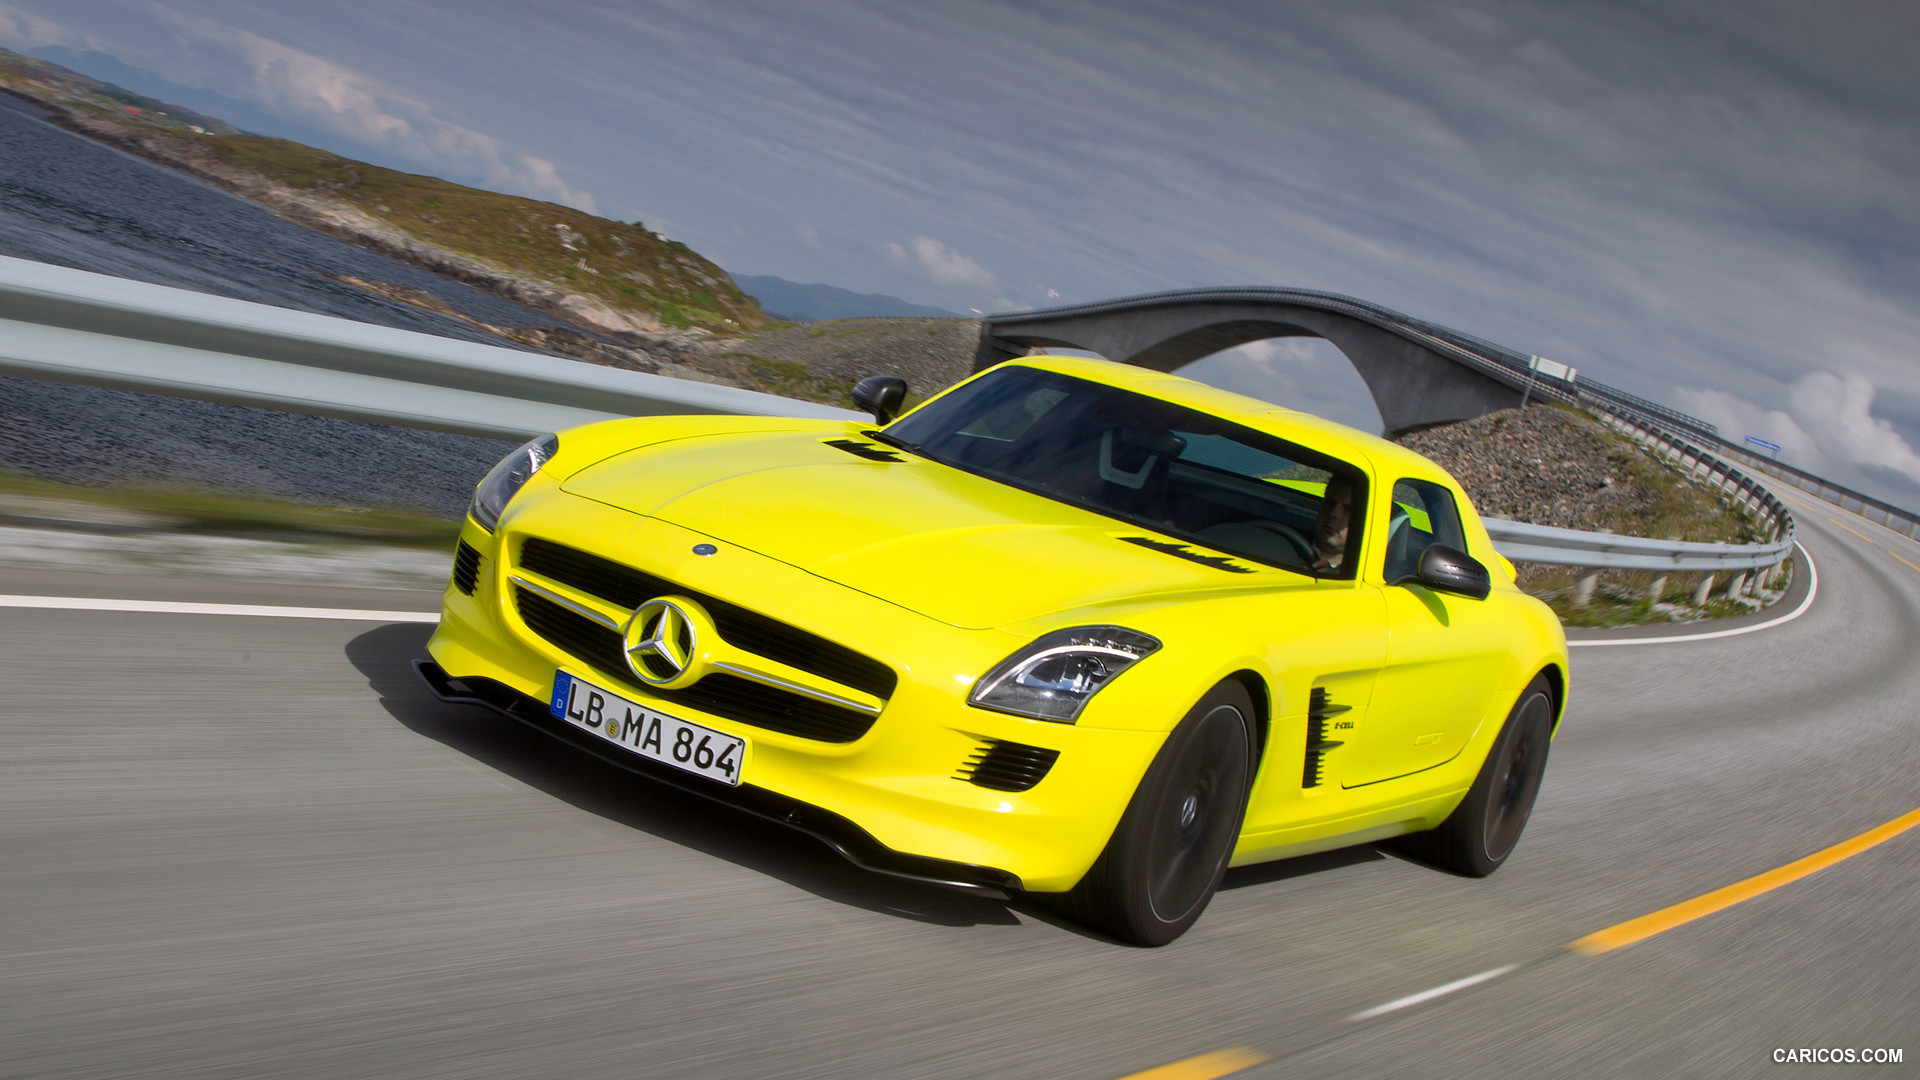 Mercedes-Benz SLS AMG E-CELL Concept  - Front, #40 of 60